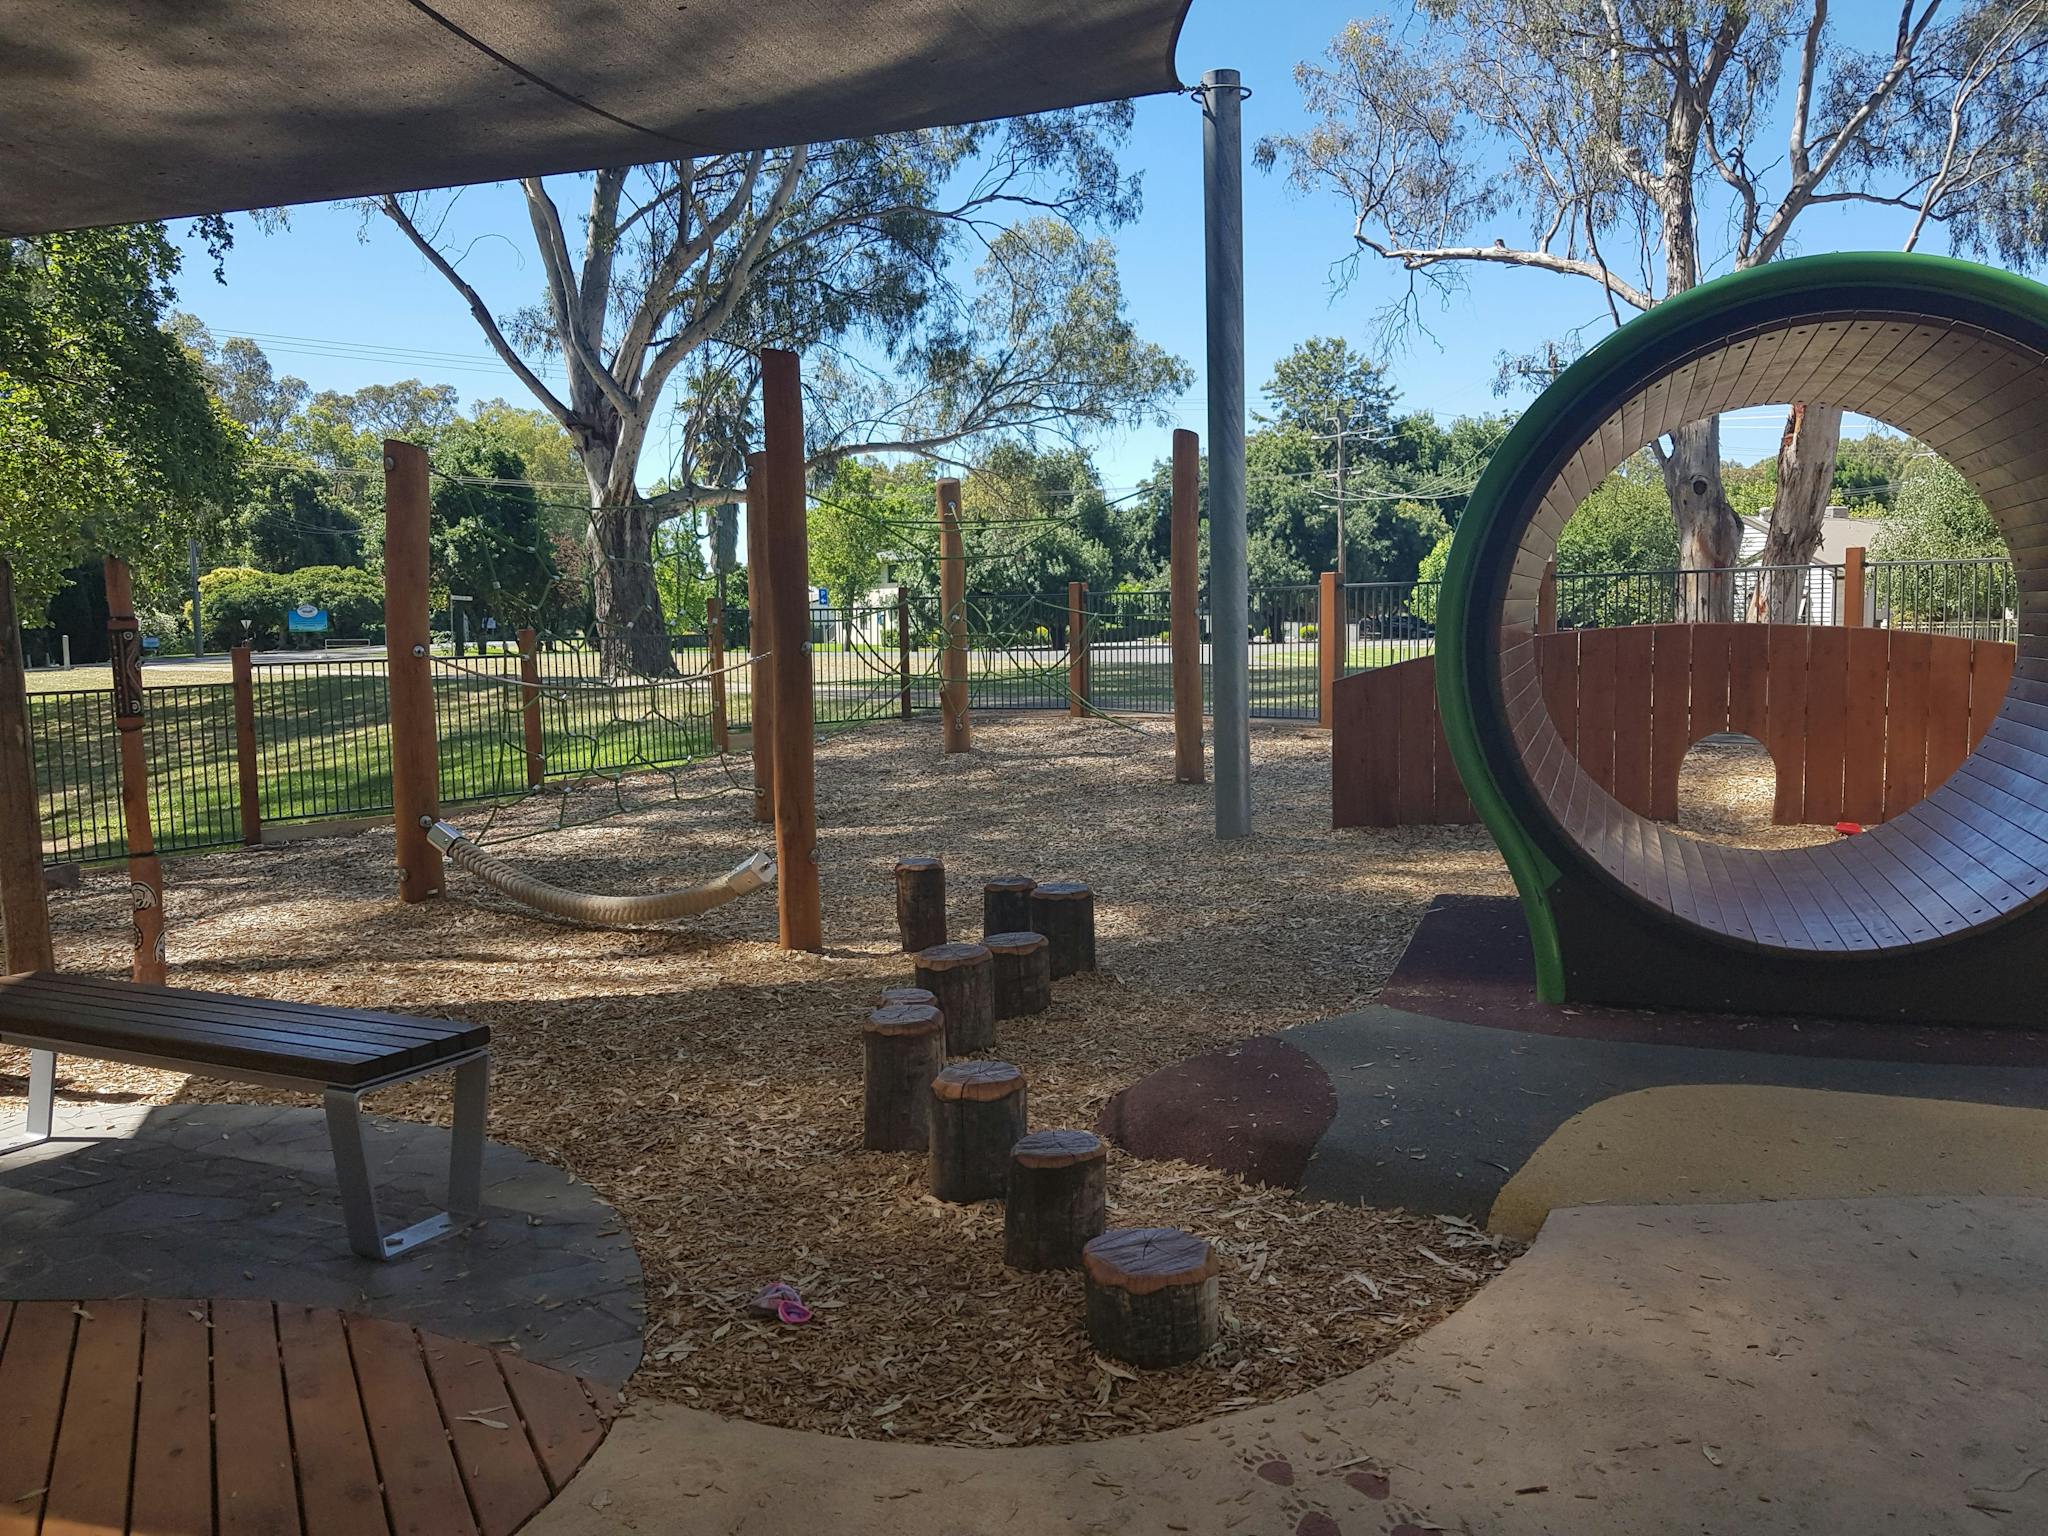 Childrens play ground, seat, stepping stones, tunnel, rope climbing structure, blue sky, grass, tree